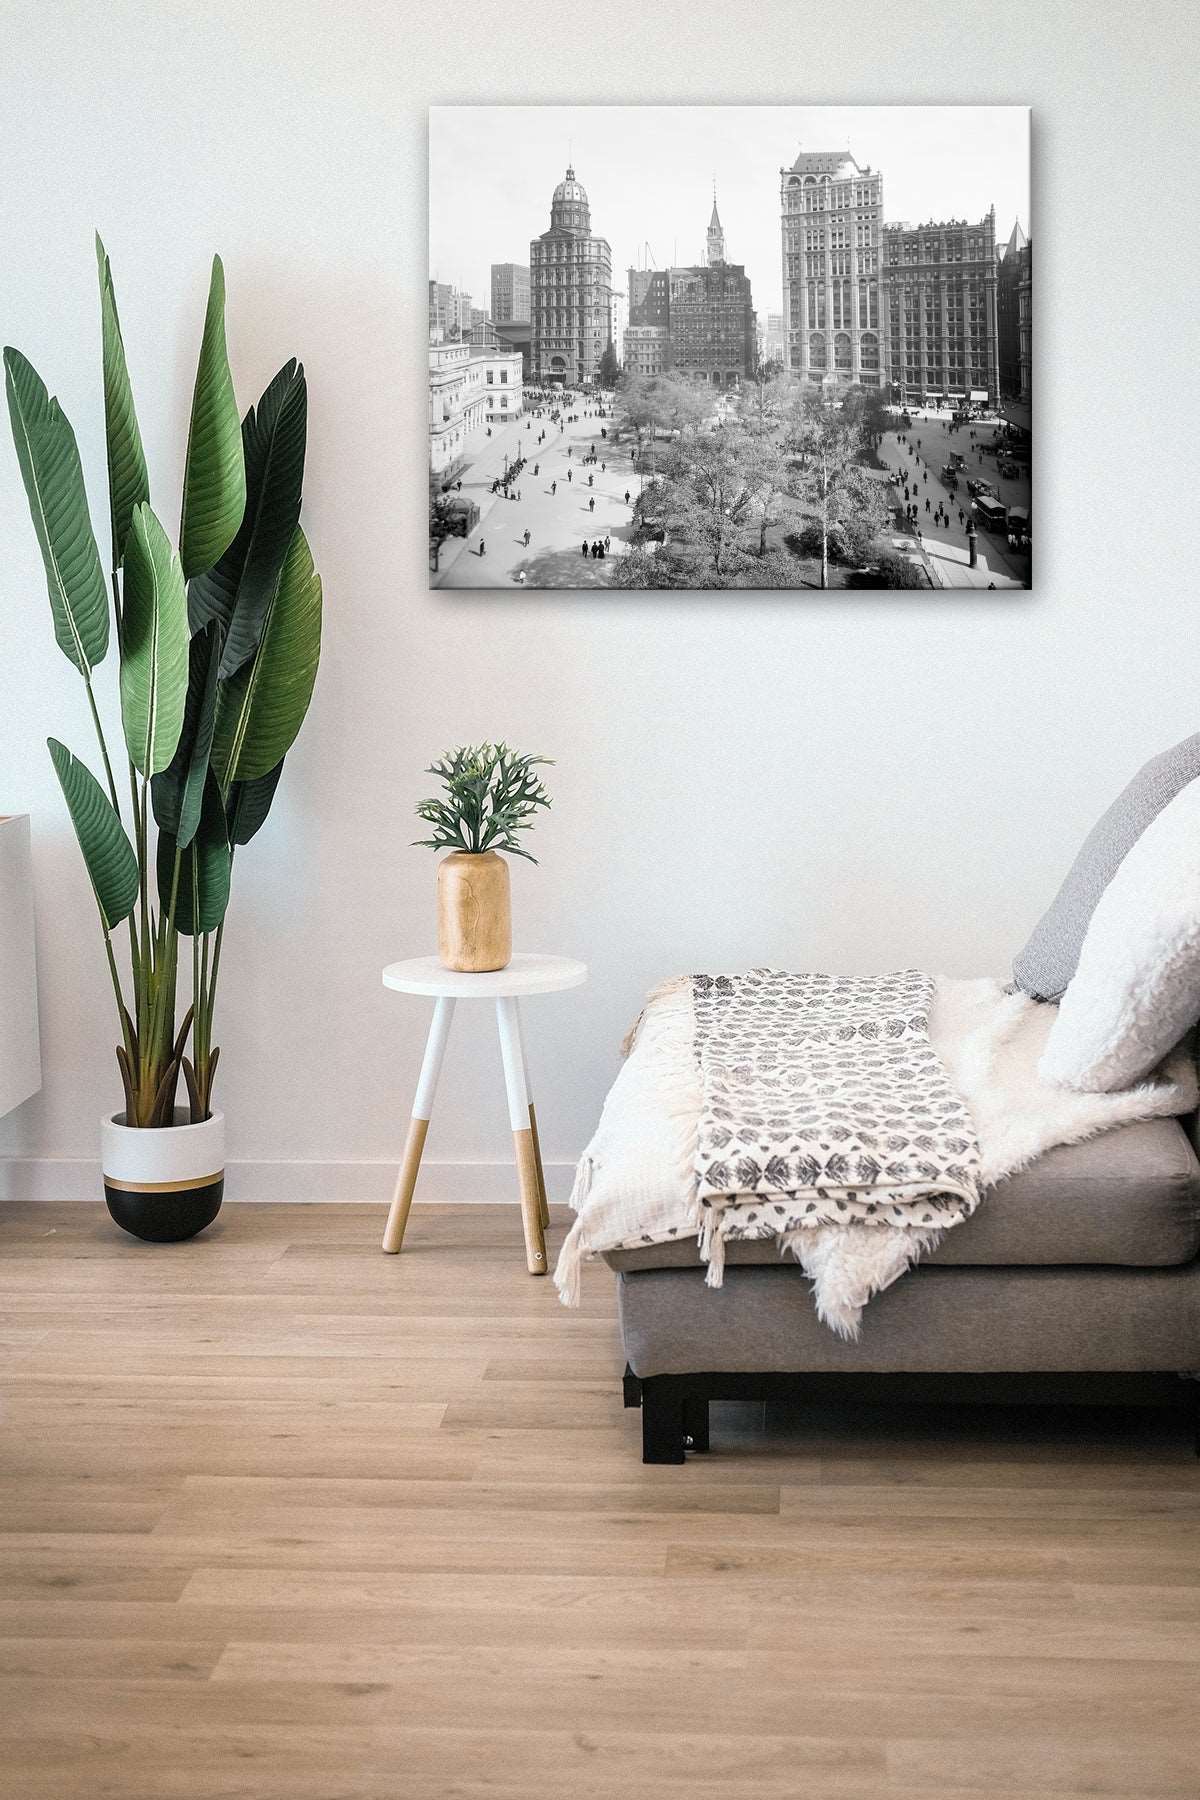 A canvas print of a photograph of New York City hanging in a living room